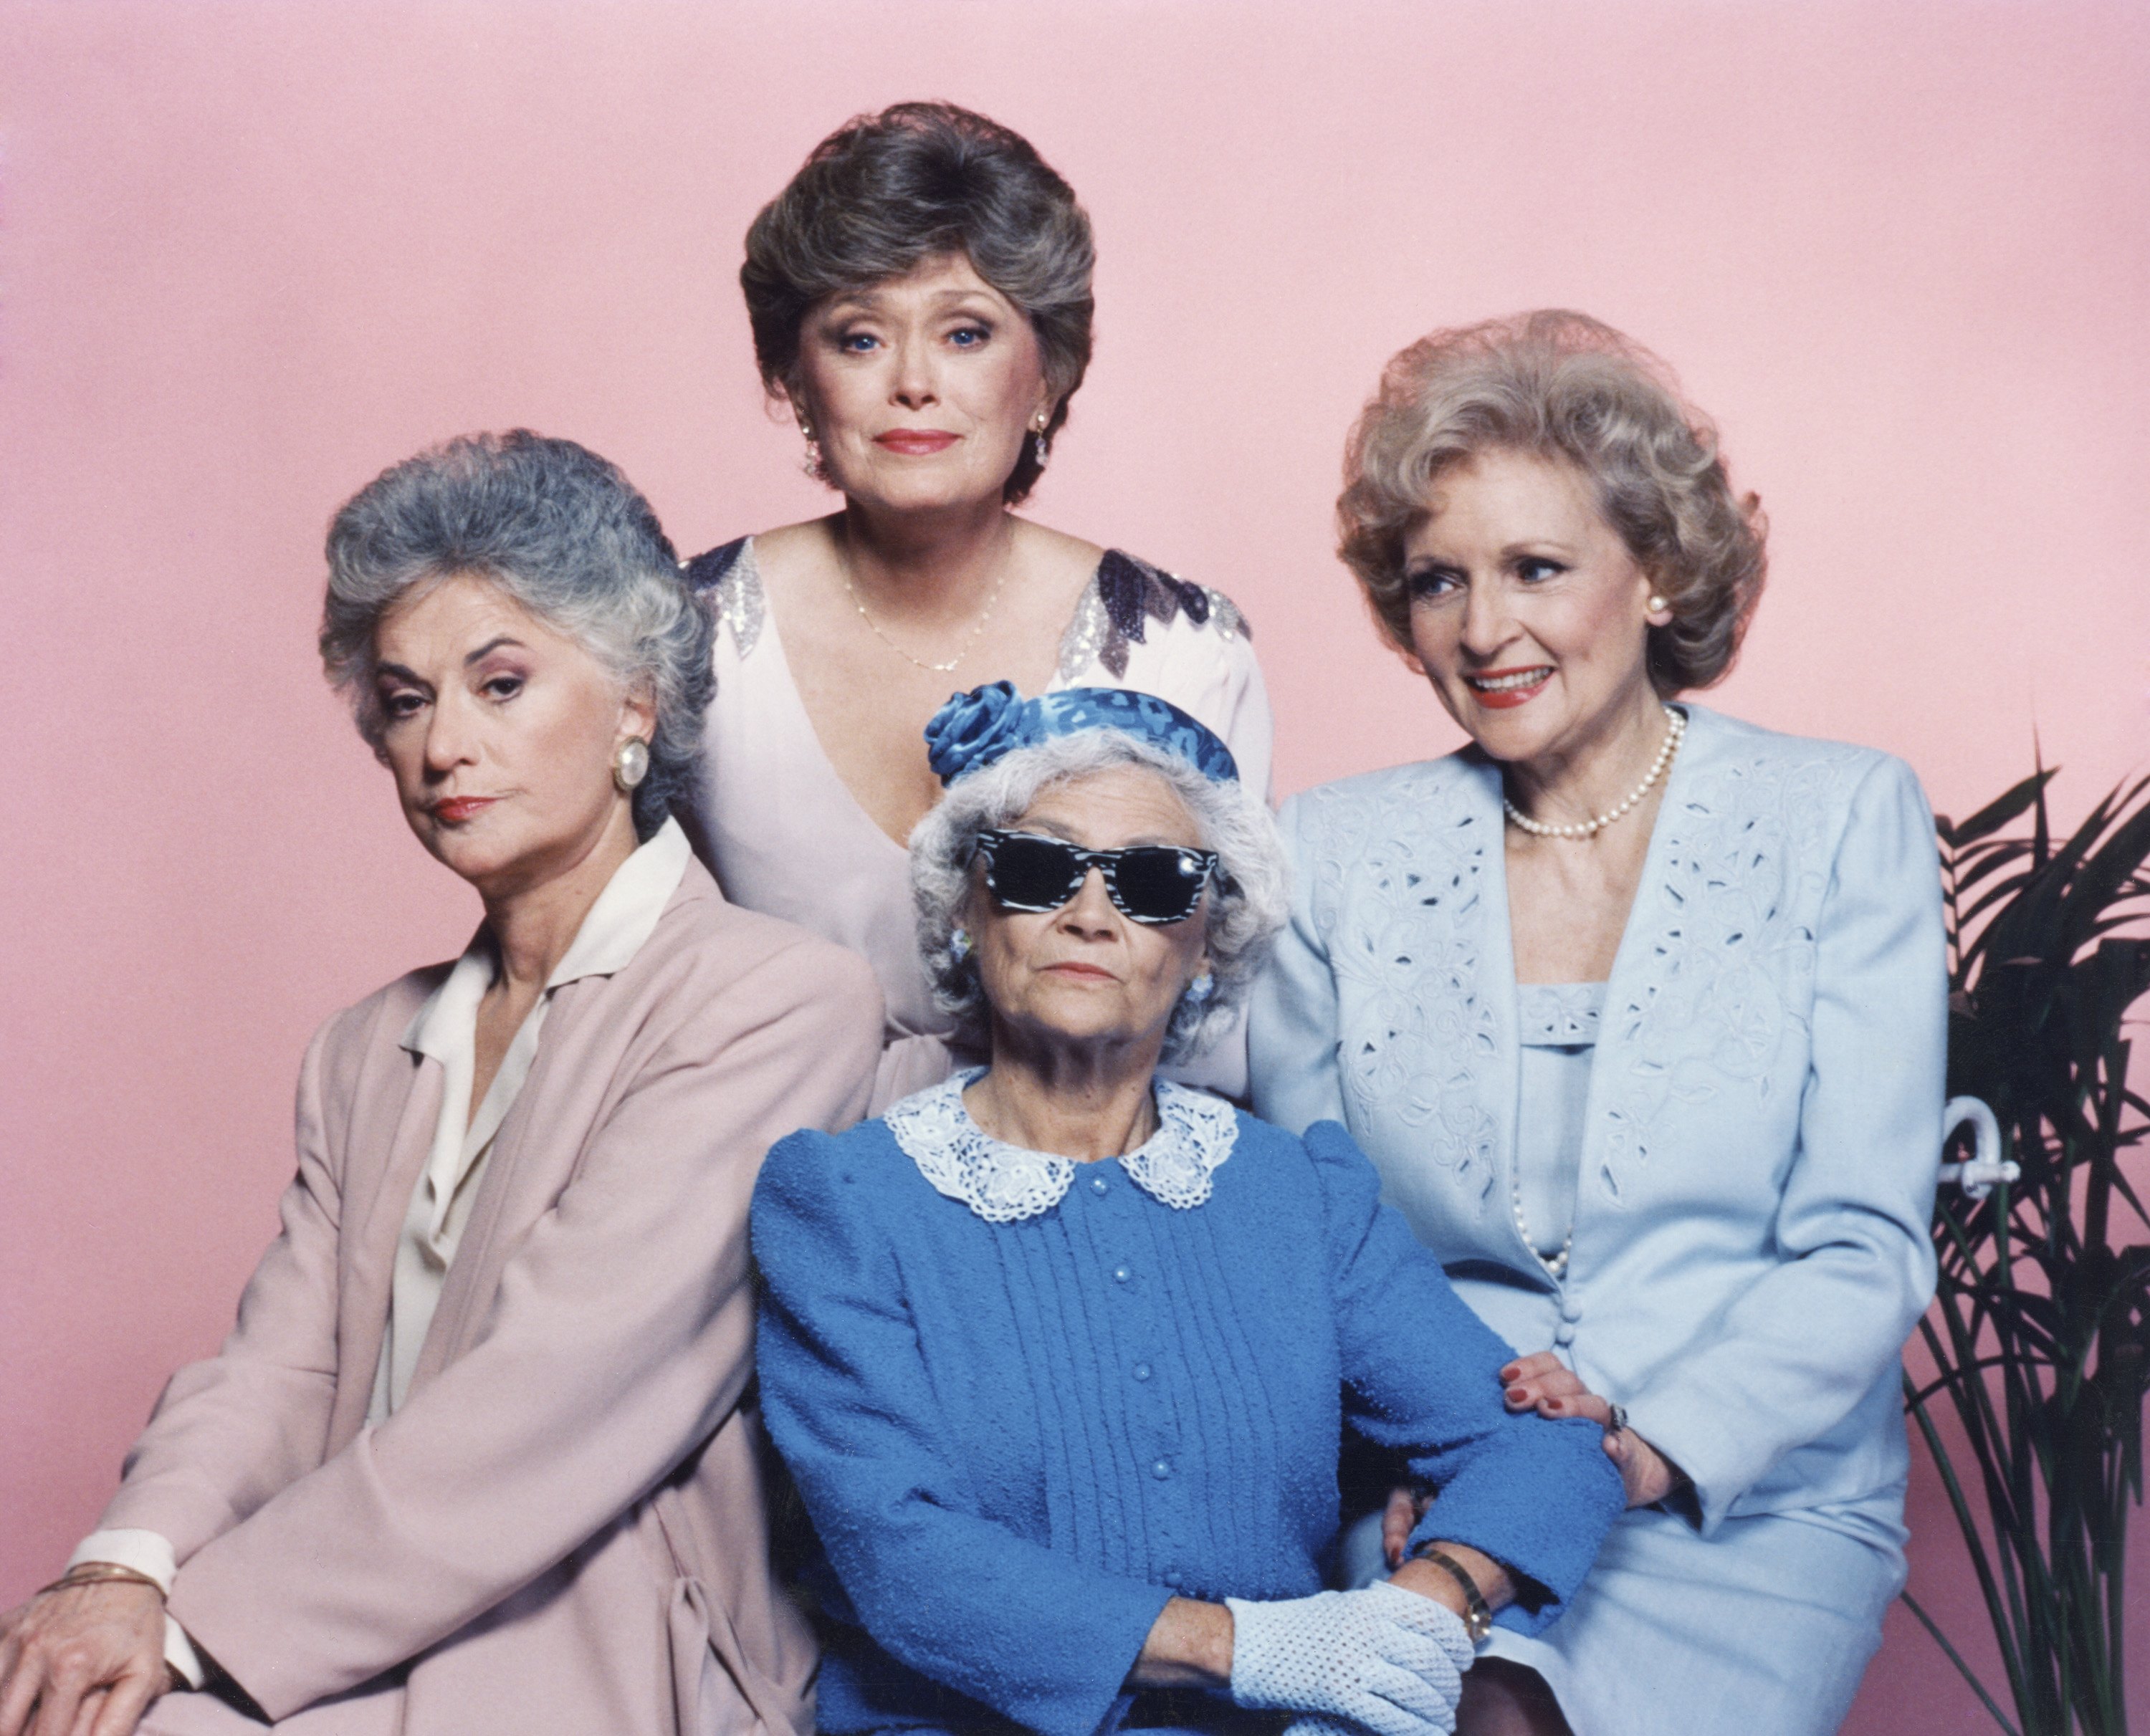 the cast of 'The Golden Girls' in a promotional photo 